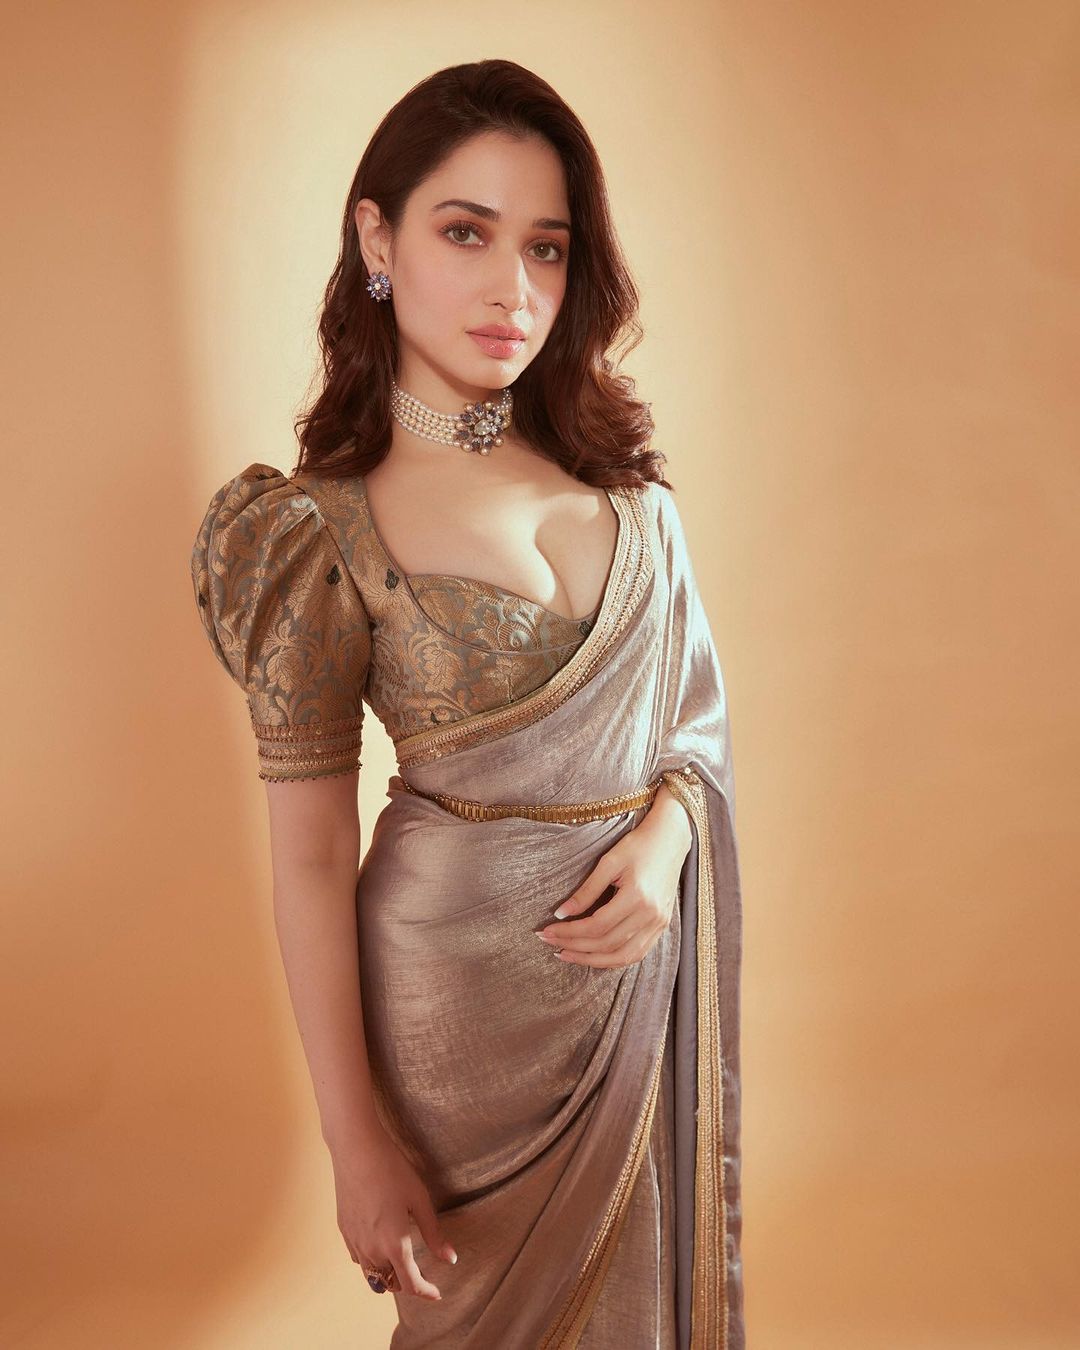 Did you notice Tamannaah Bhatia's sexy brocade blouse? Check out her look if you love cocktail-ready drapes